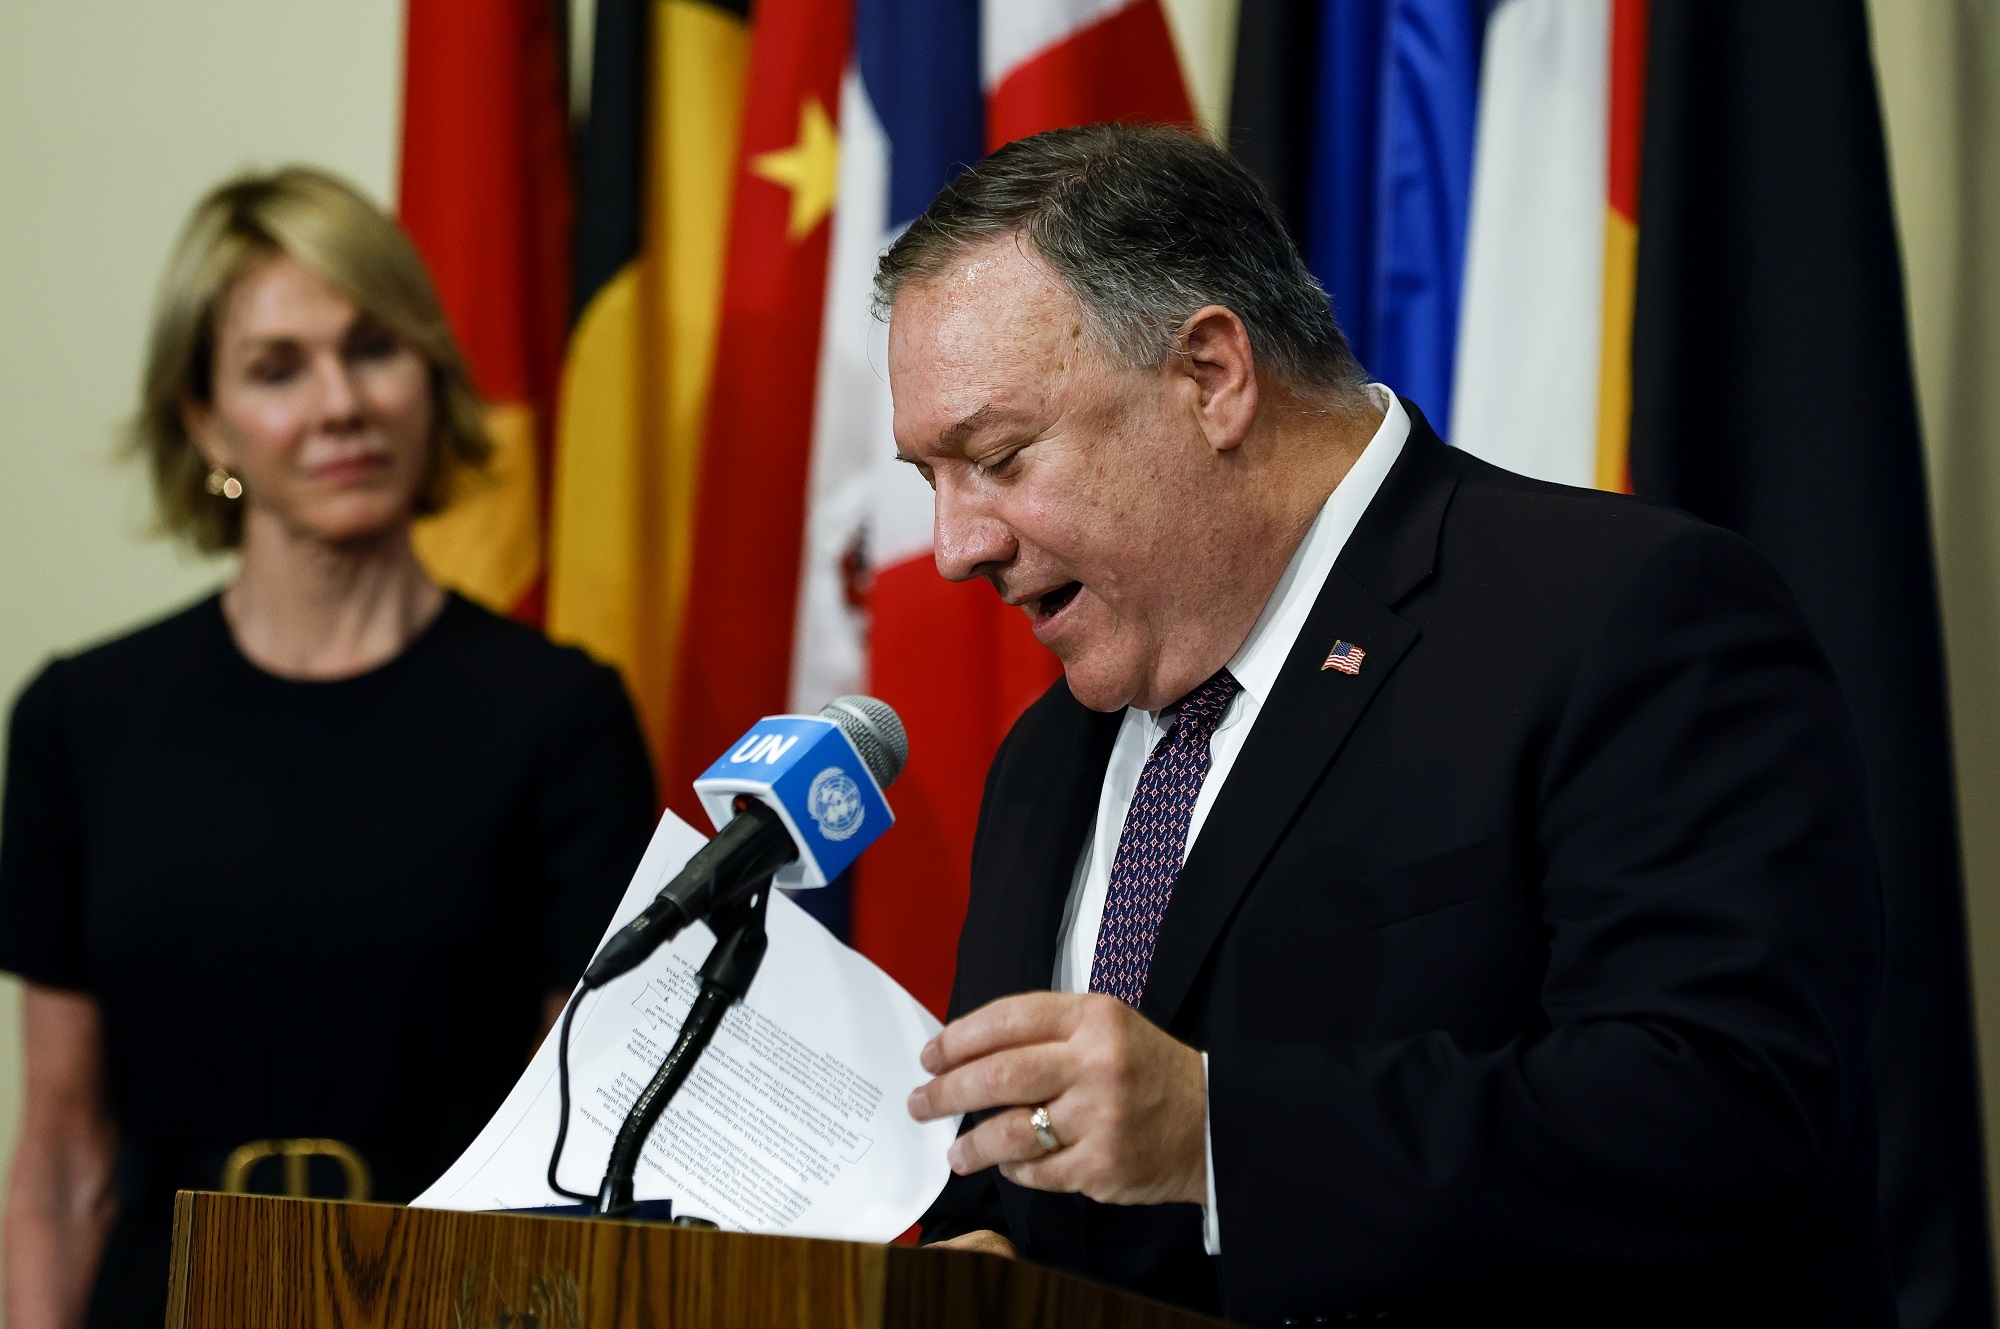 US Secretary of State Mike Pompeo called for restoring 'virtually all UN sanctions on Iran'